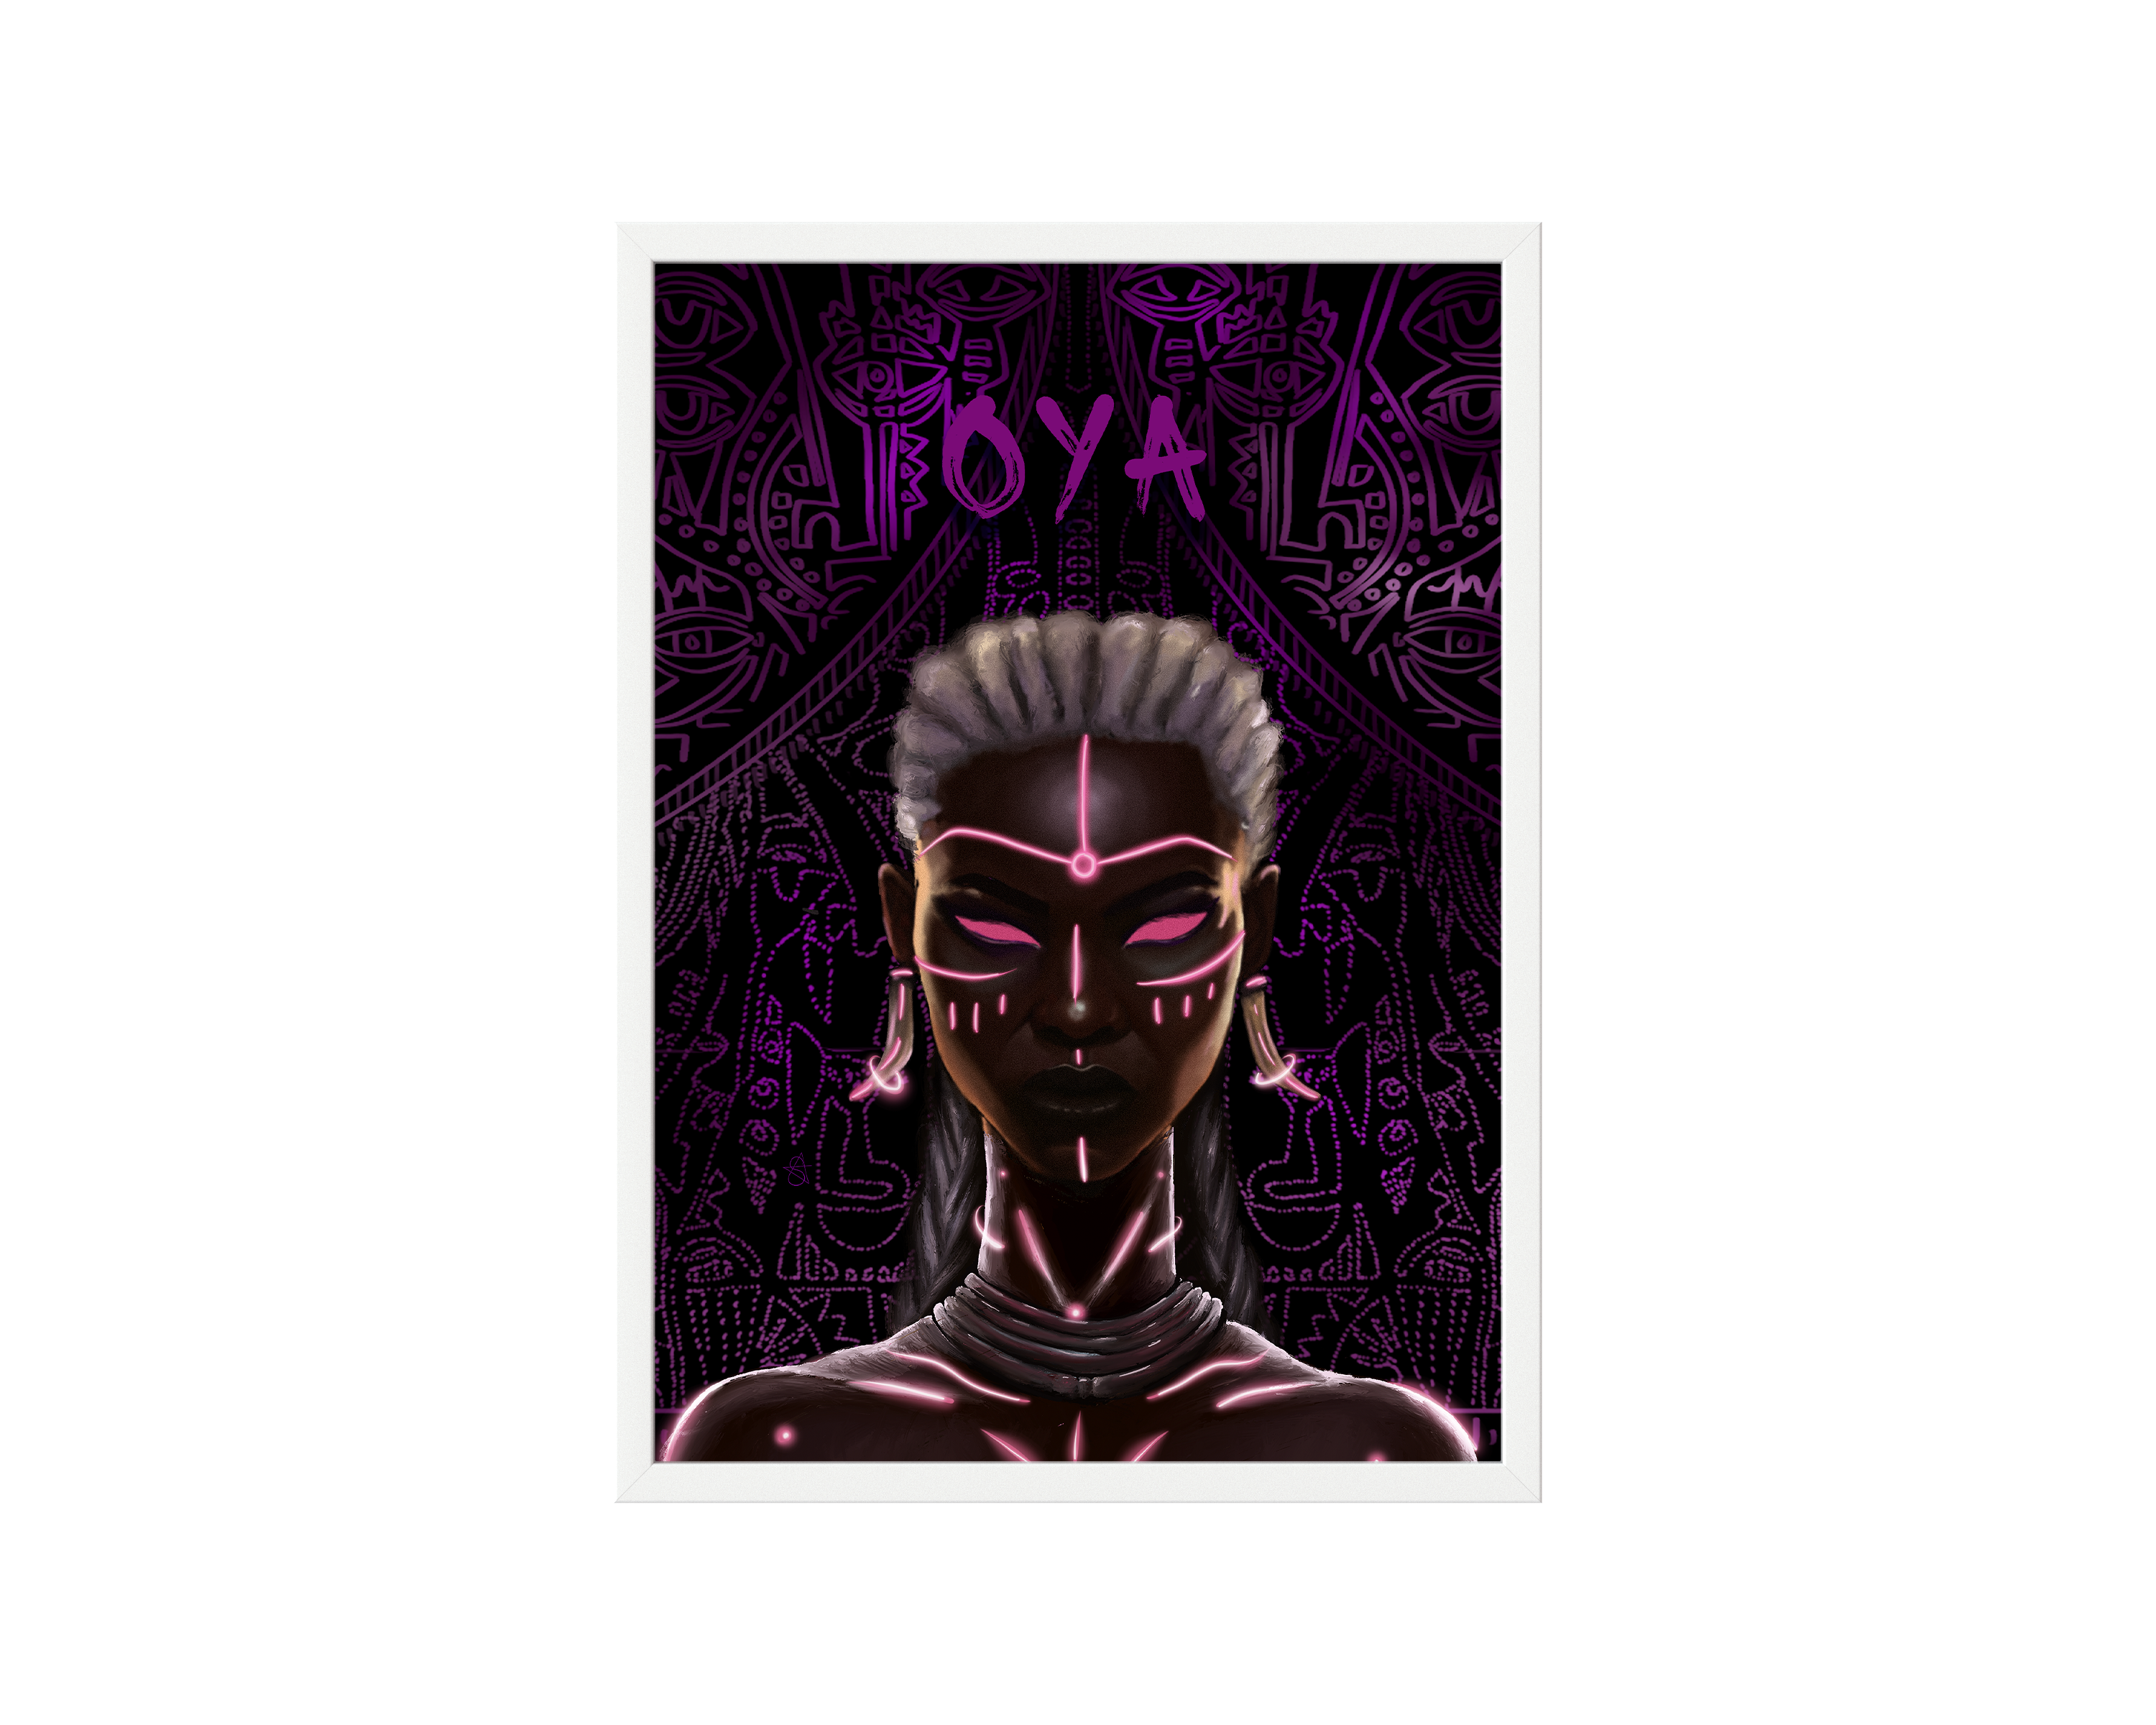 Oya Holographic Art Print on high-quality matte or velvet paper, framed in gallery black, white, or natural maple, depicting Yoruba Orisa of storms and wind.